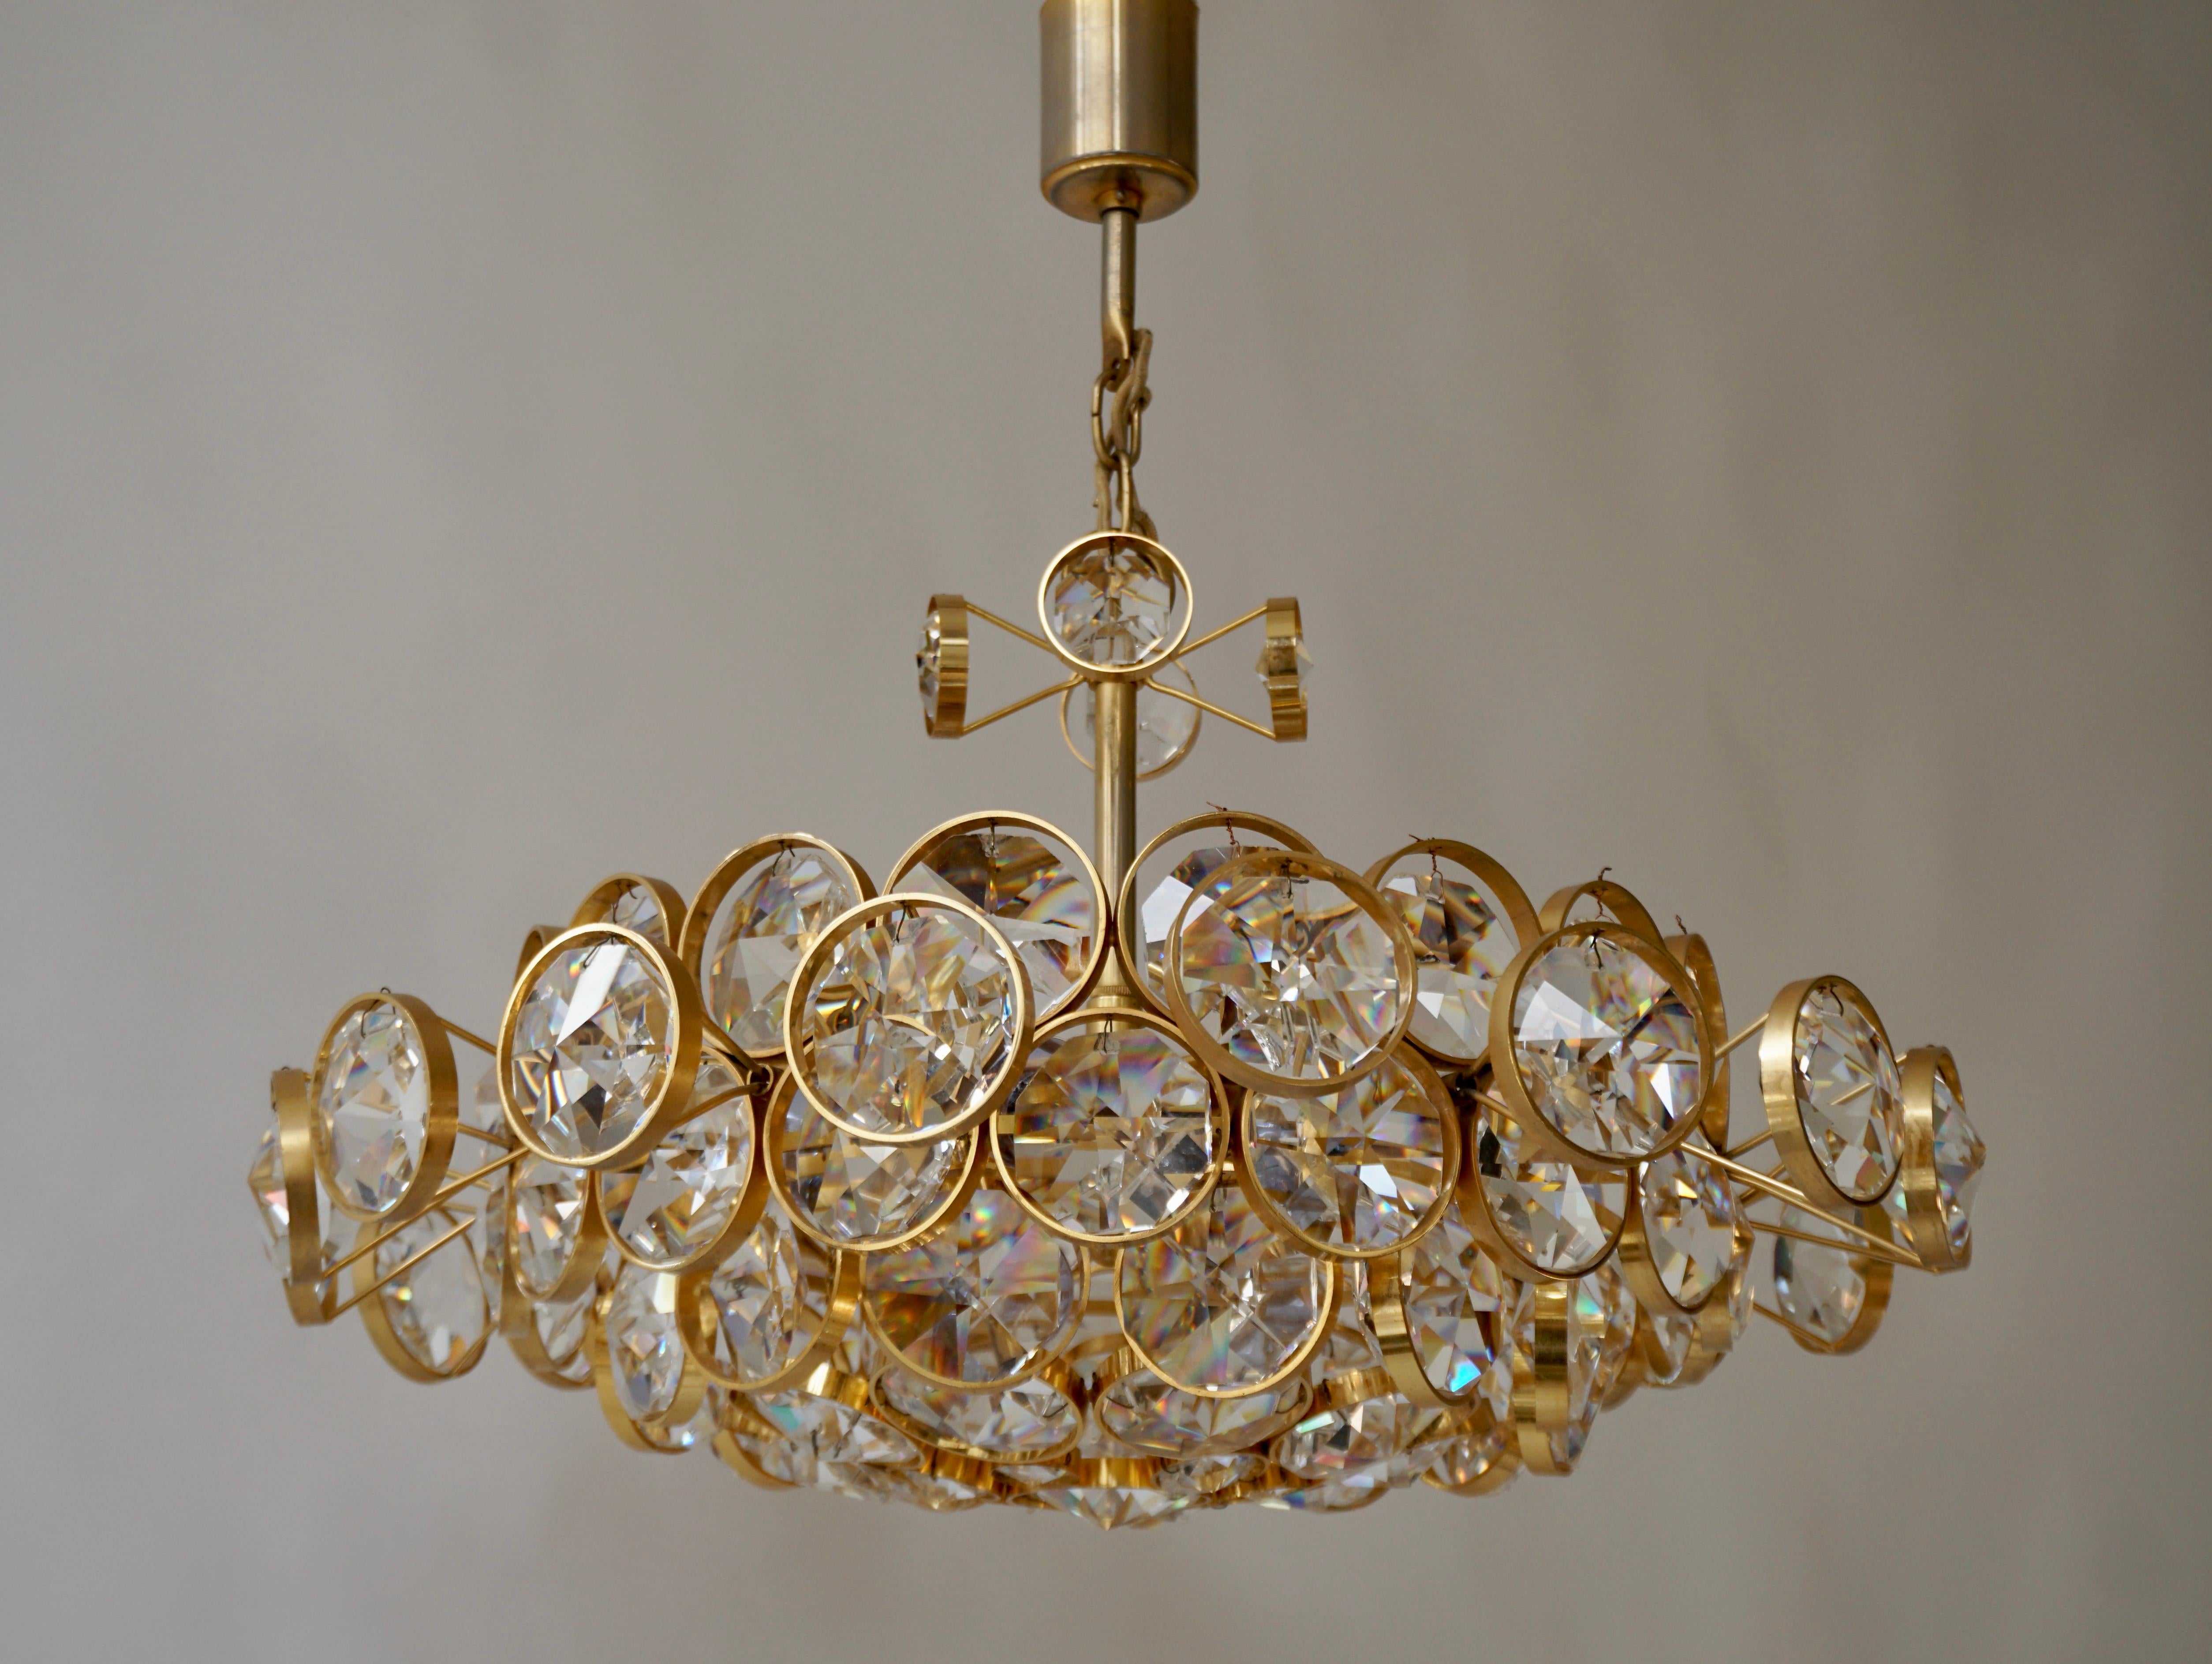 A gorgeous and high quality gold-plated brass chandelier or pendant light by Palwa (Palme & Walter), Germany, manufactured in midcentury, circa 1960.
An awesome Hollywood Regency light fixture.
Similar to the lights of J.L. Lobmeyr or Bakalowits.